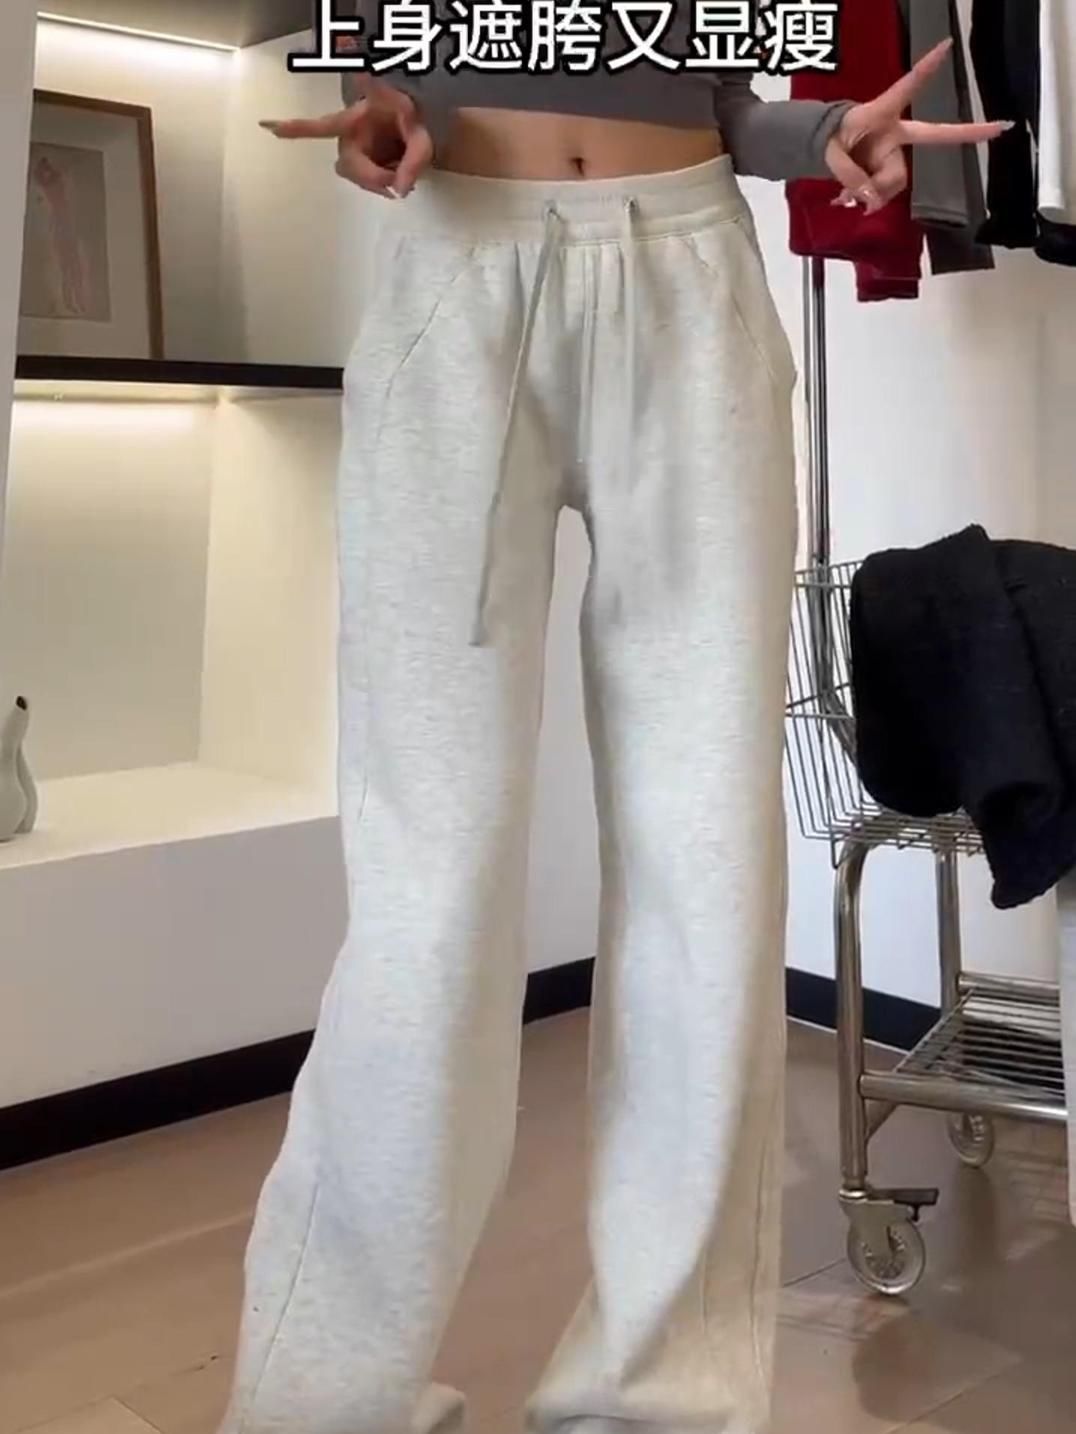 American white and gray micro-flared pants for women in autumn and winter high-waist slim sports casual pants drapey floor-length horse hoof pants